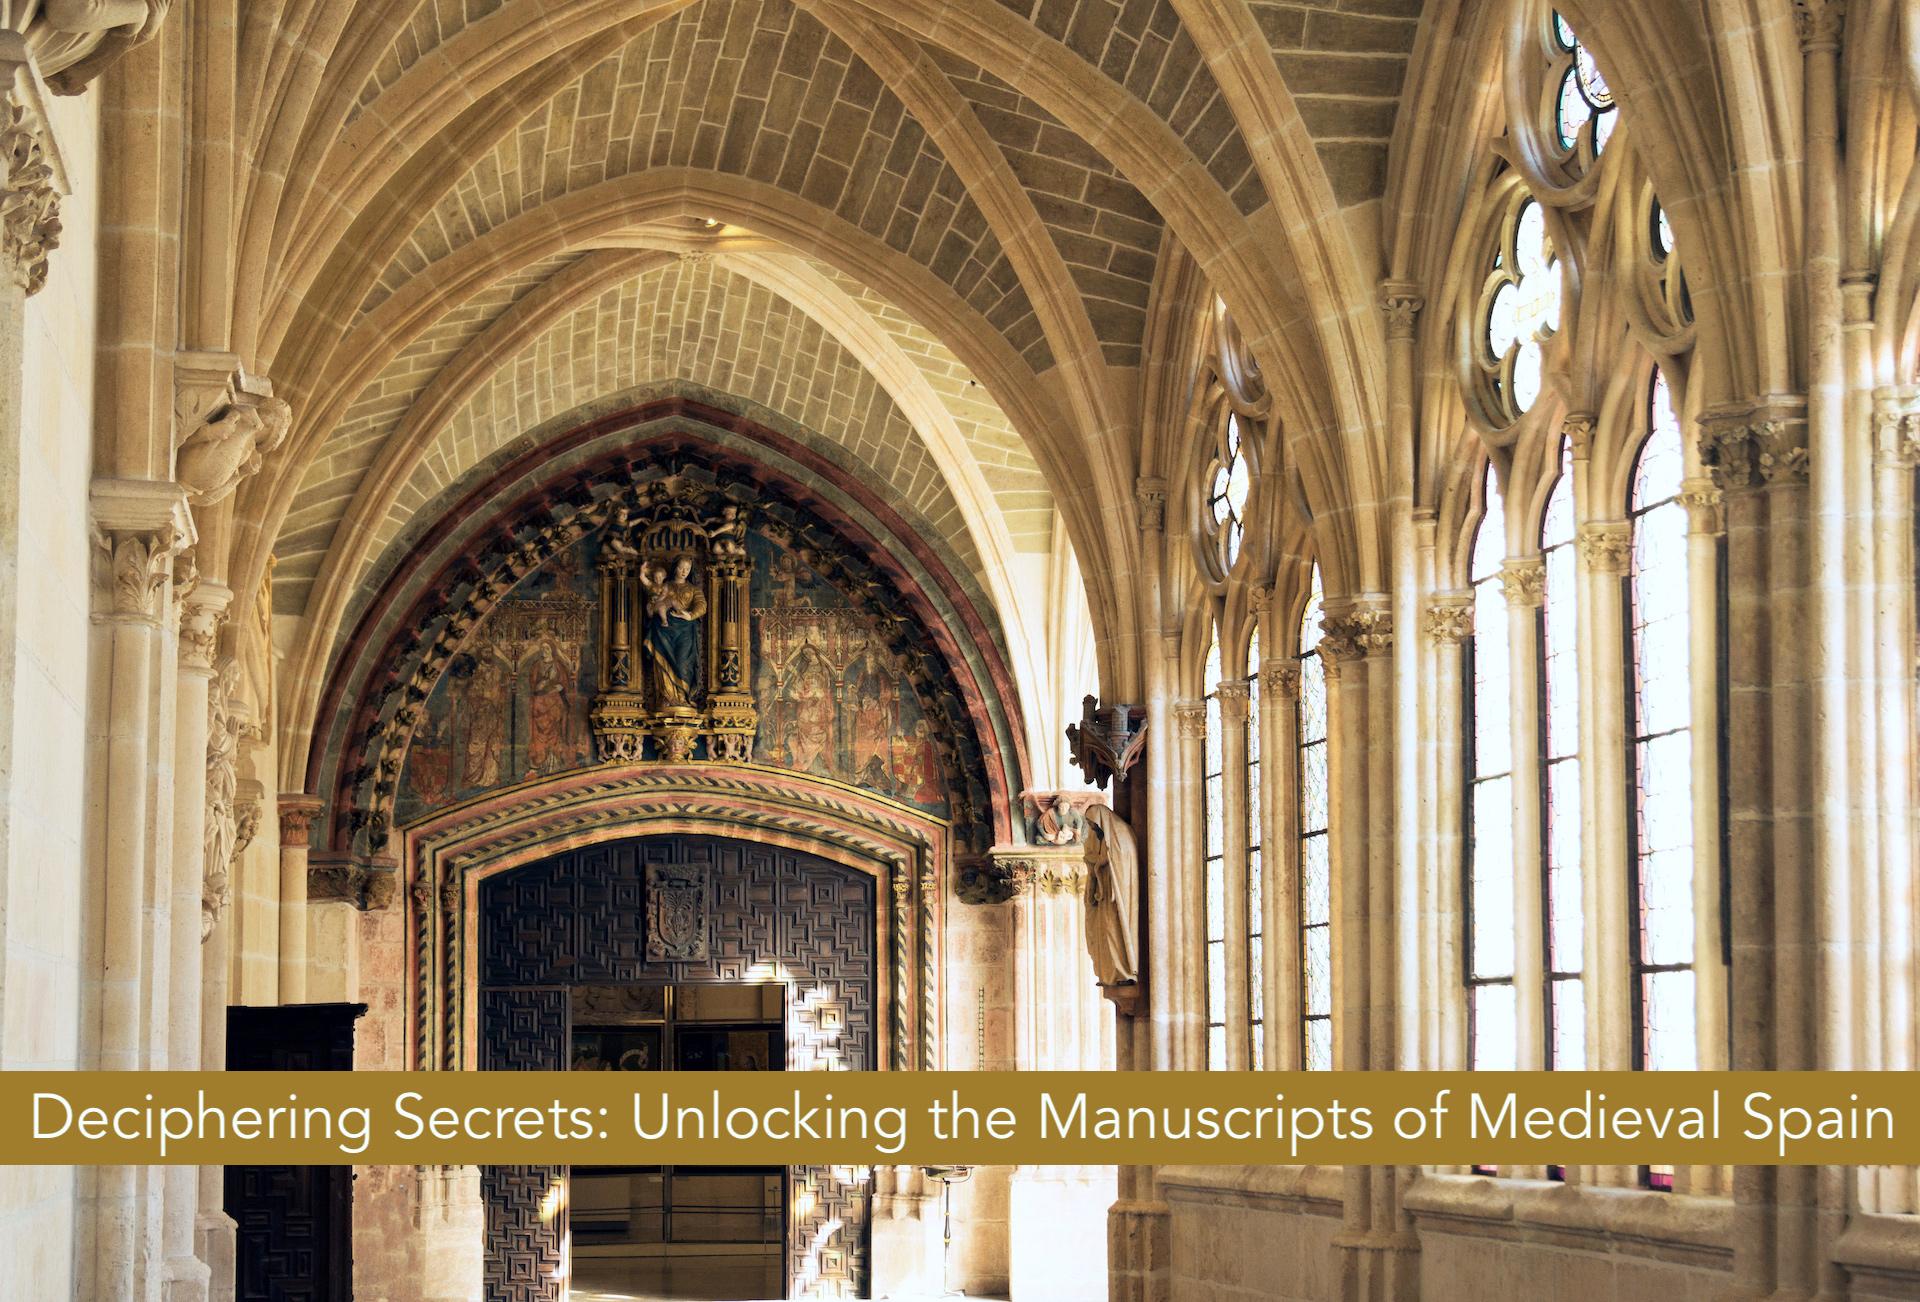 Burgos Cathedral with text over "Deciphering Secrets: Unlocking the Manuscripts of Medieval Spain"